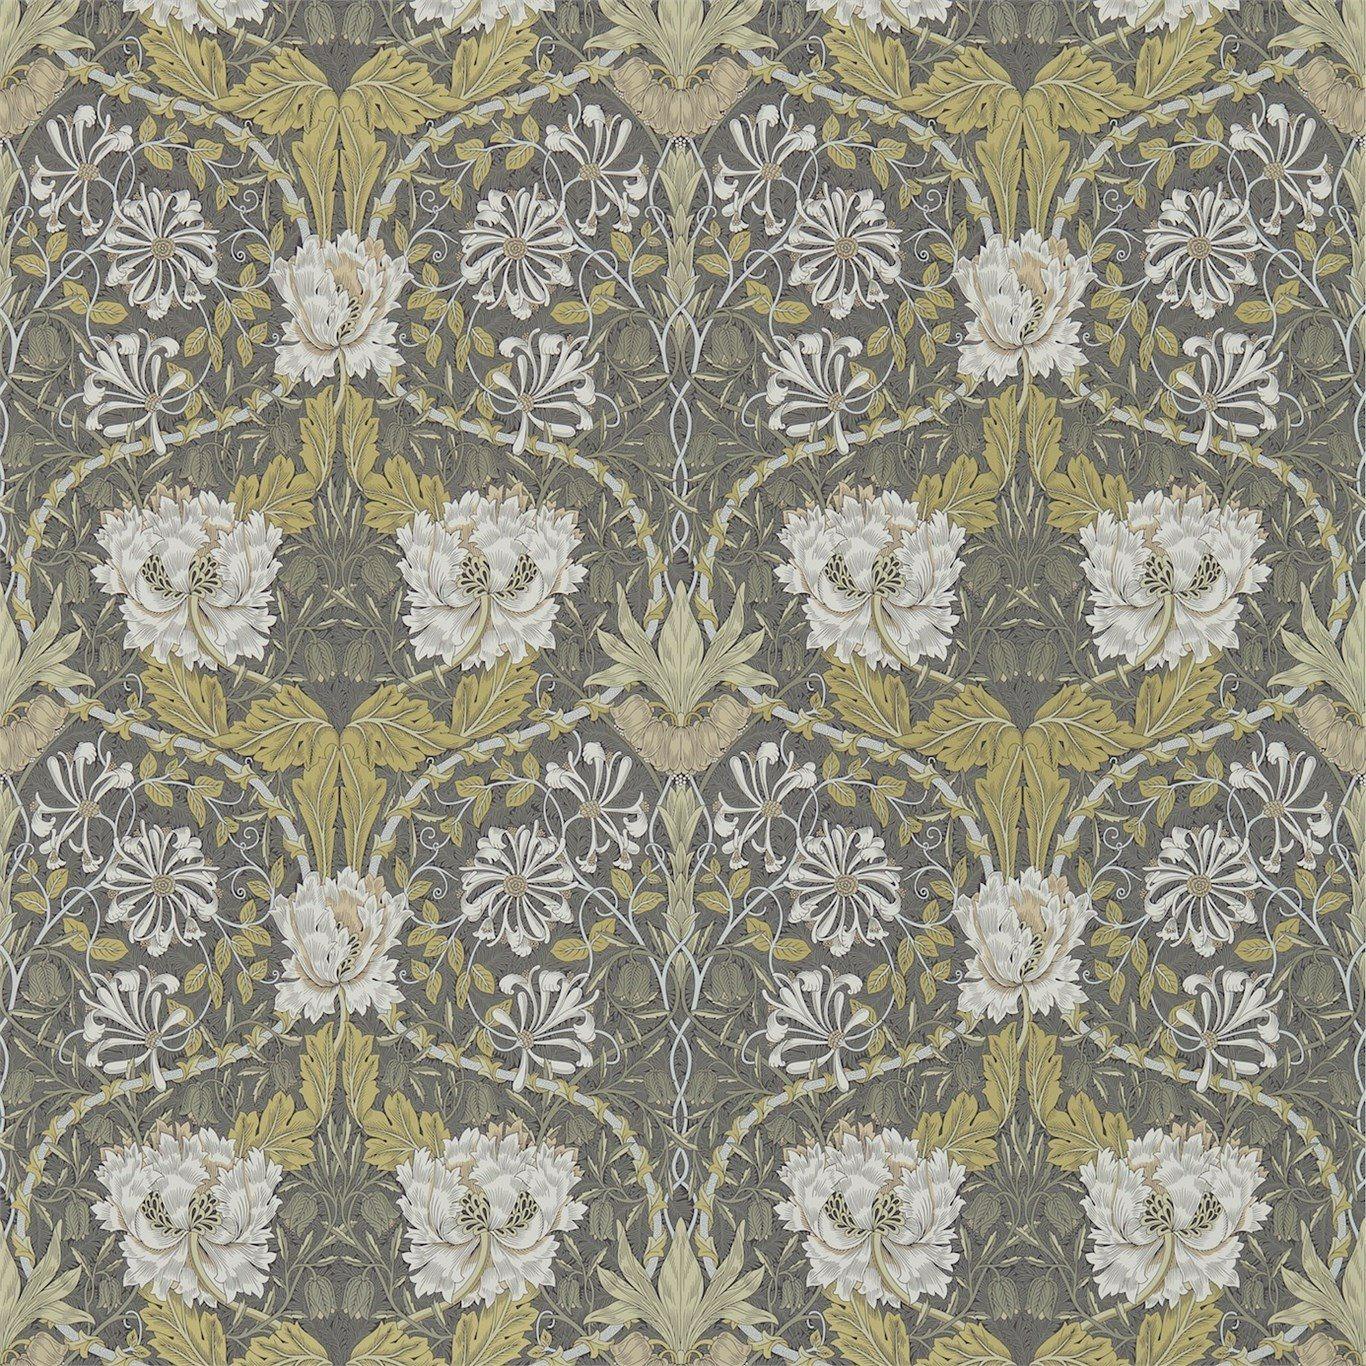 William Morris Honeysuckle and Tulip Wallpaper Decor Zoffany Charcoal/Gold 